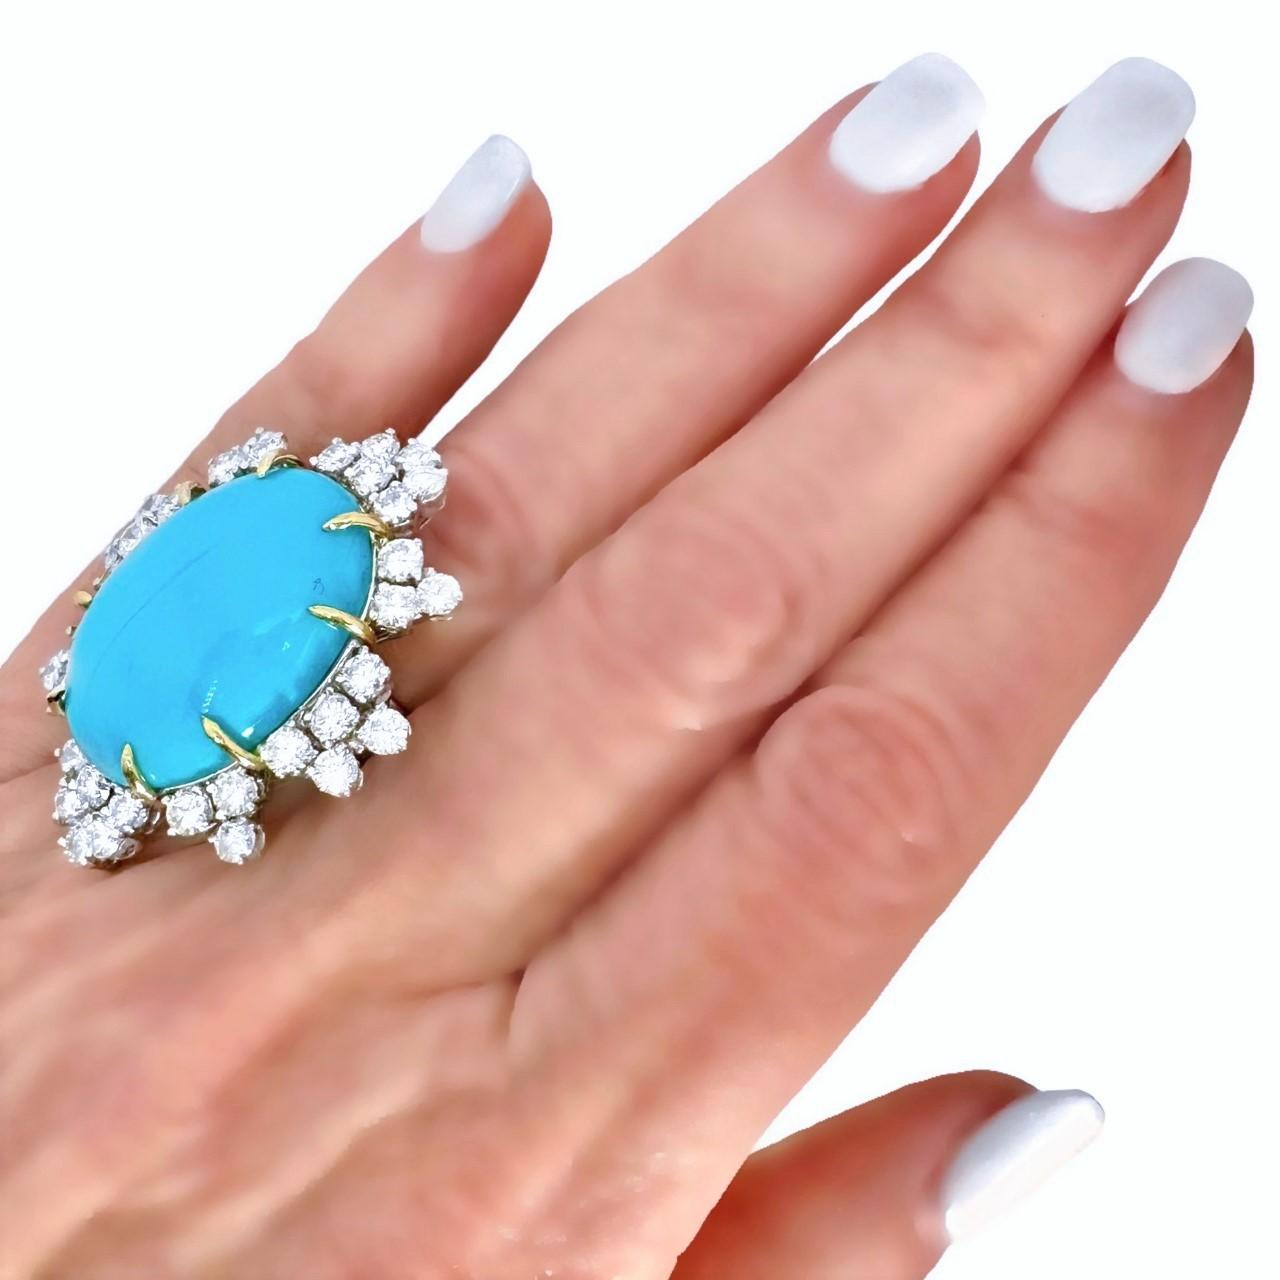 Magnificent Mid-20th Century Turquoise, Diamond and Platinum Cocktail Ring For Sale 6